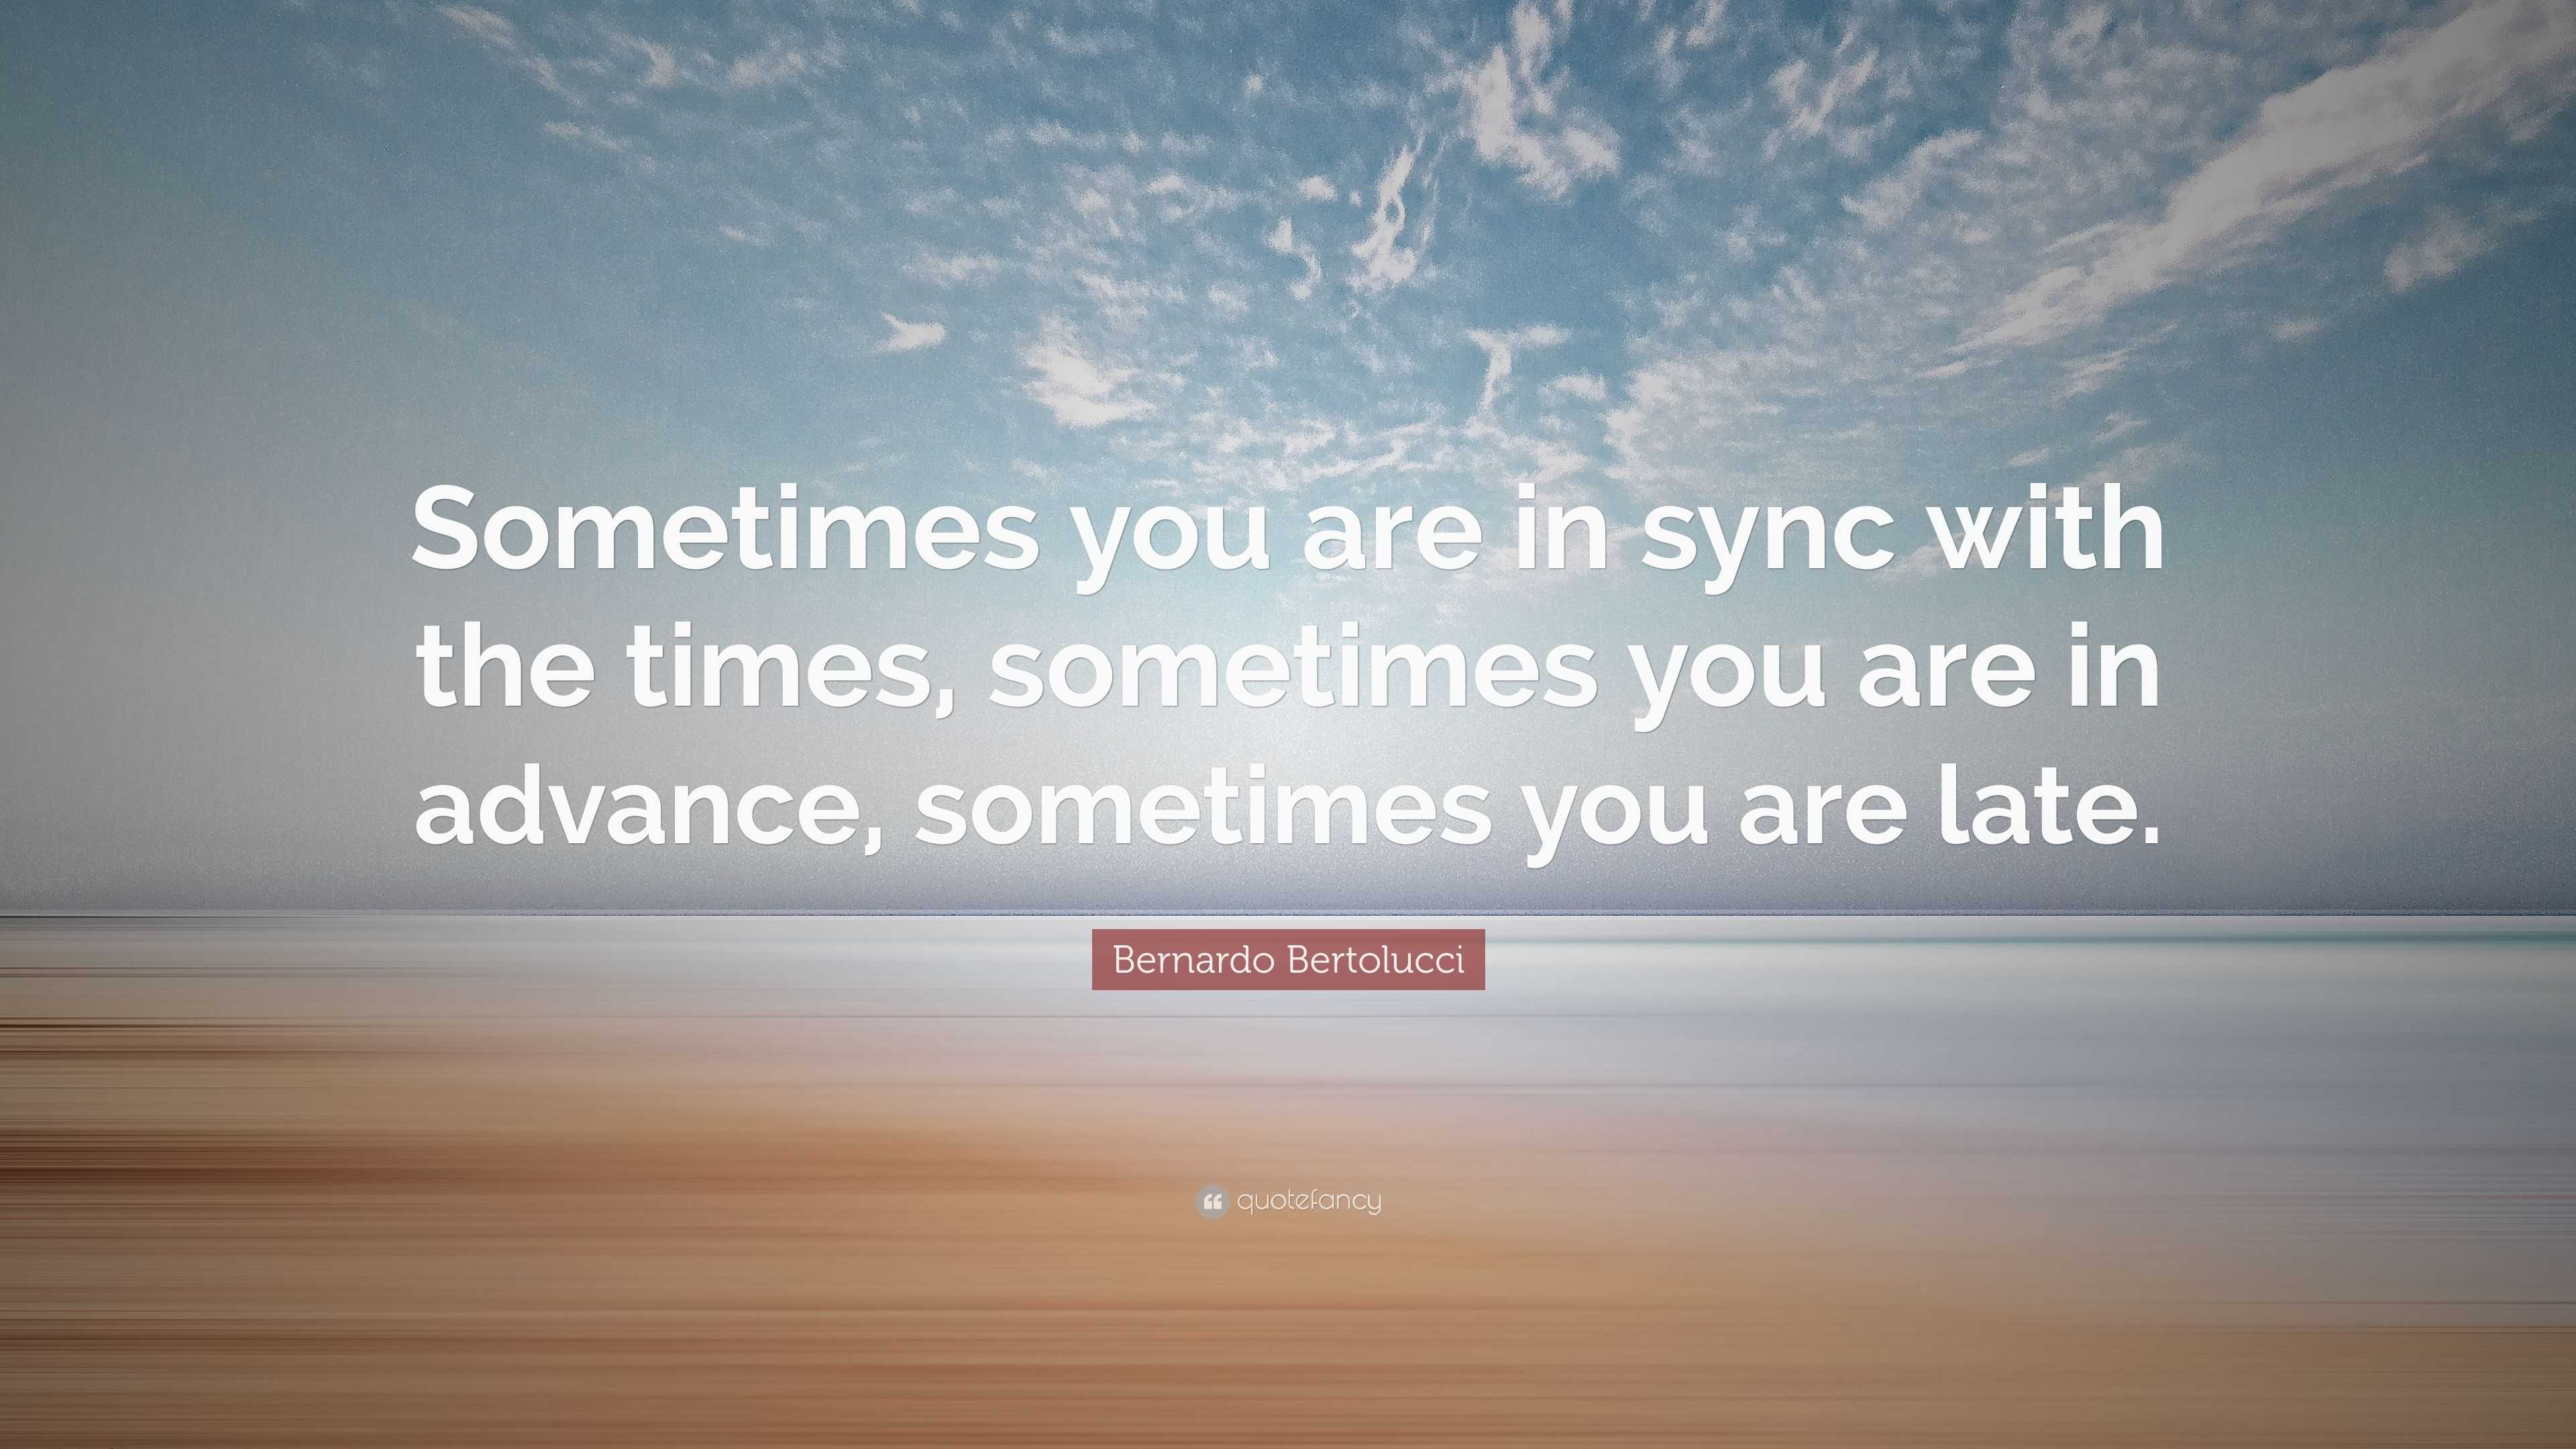 Bernardo Bertolucci Quote: “Sometimes you are in sync with the times ...